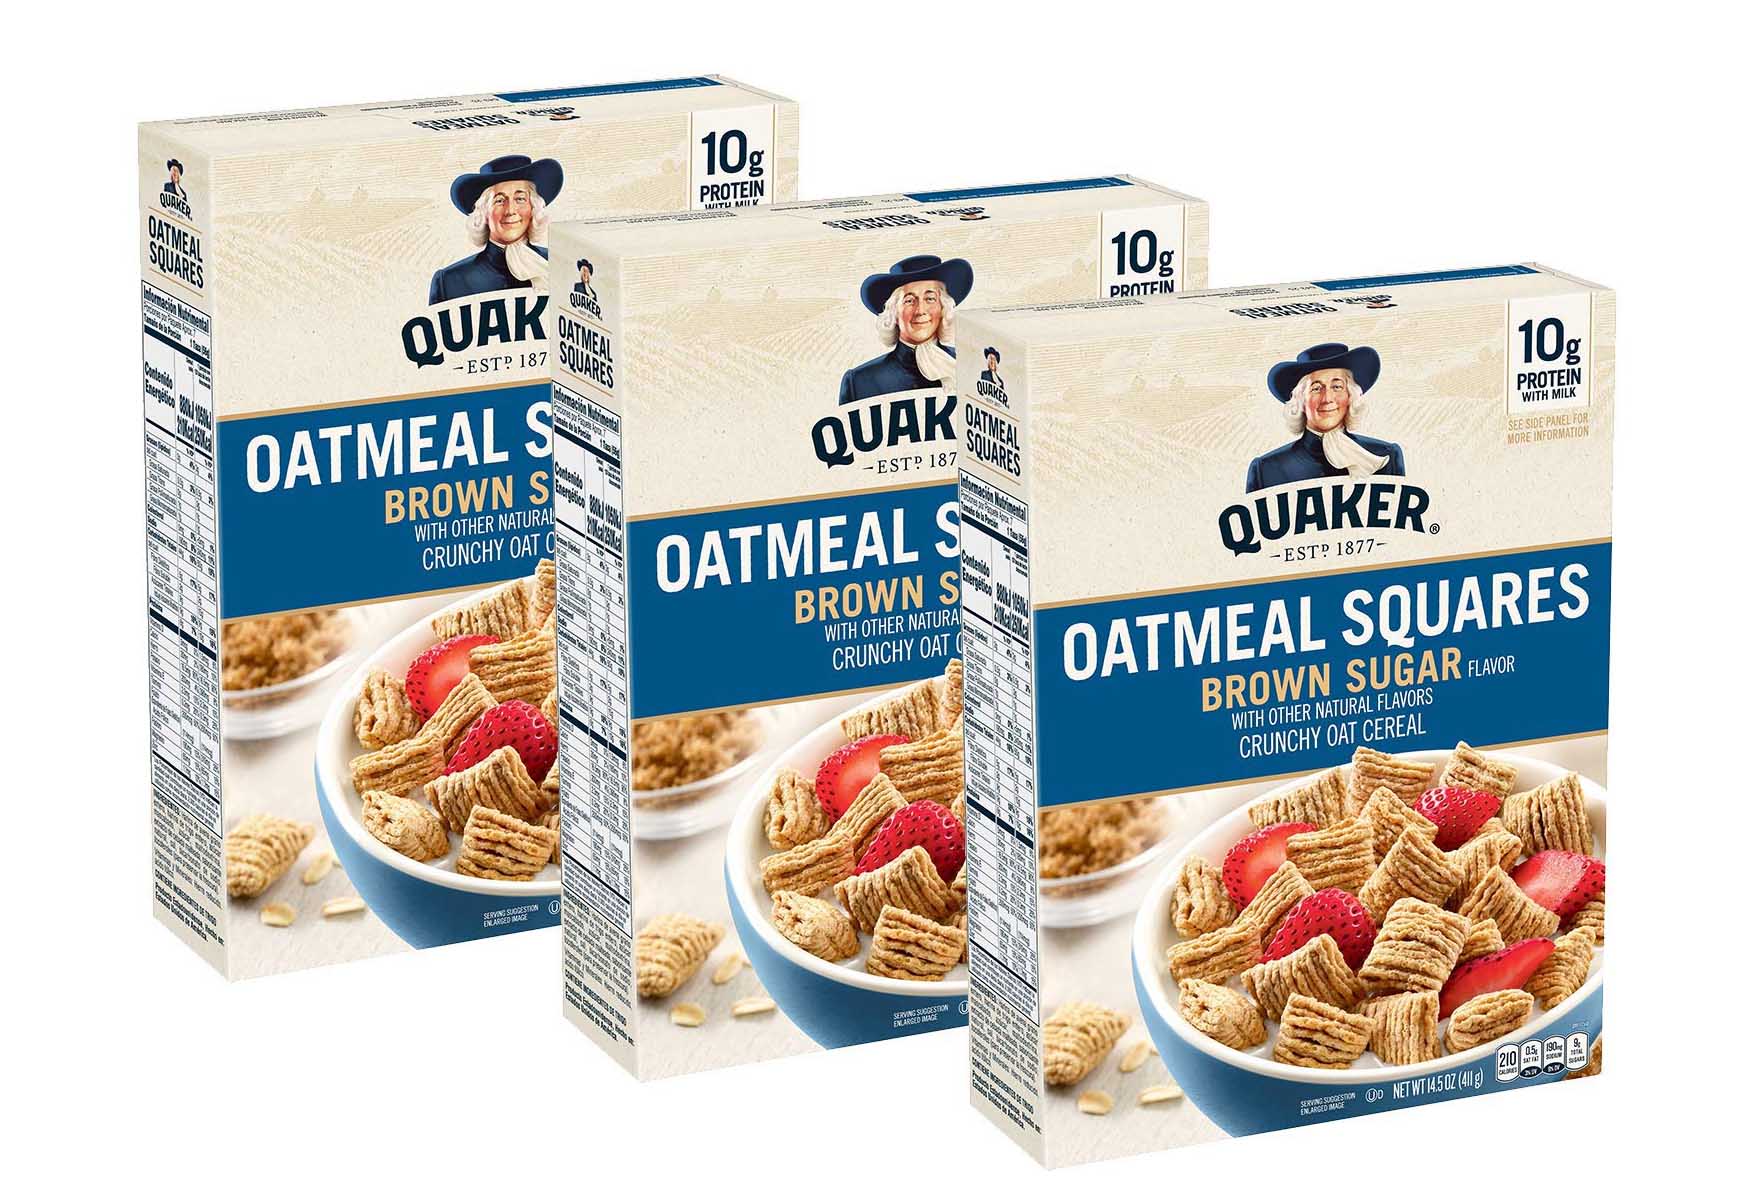 10-quaker-oatmeal-squares-nutrition-facts